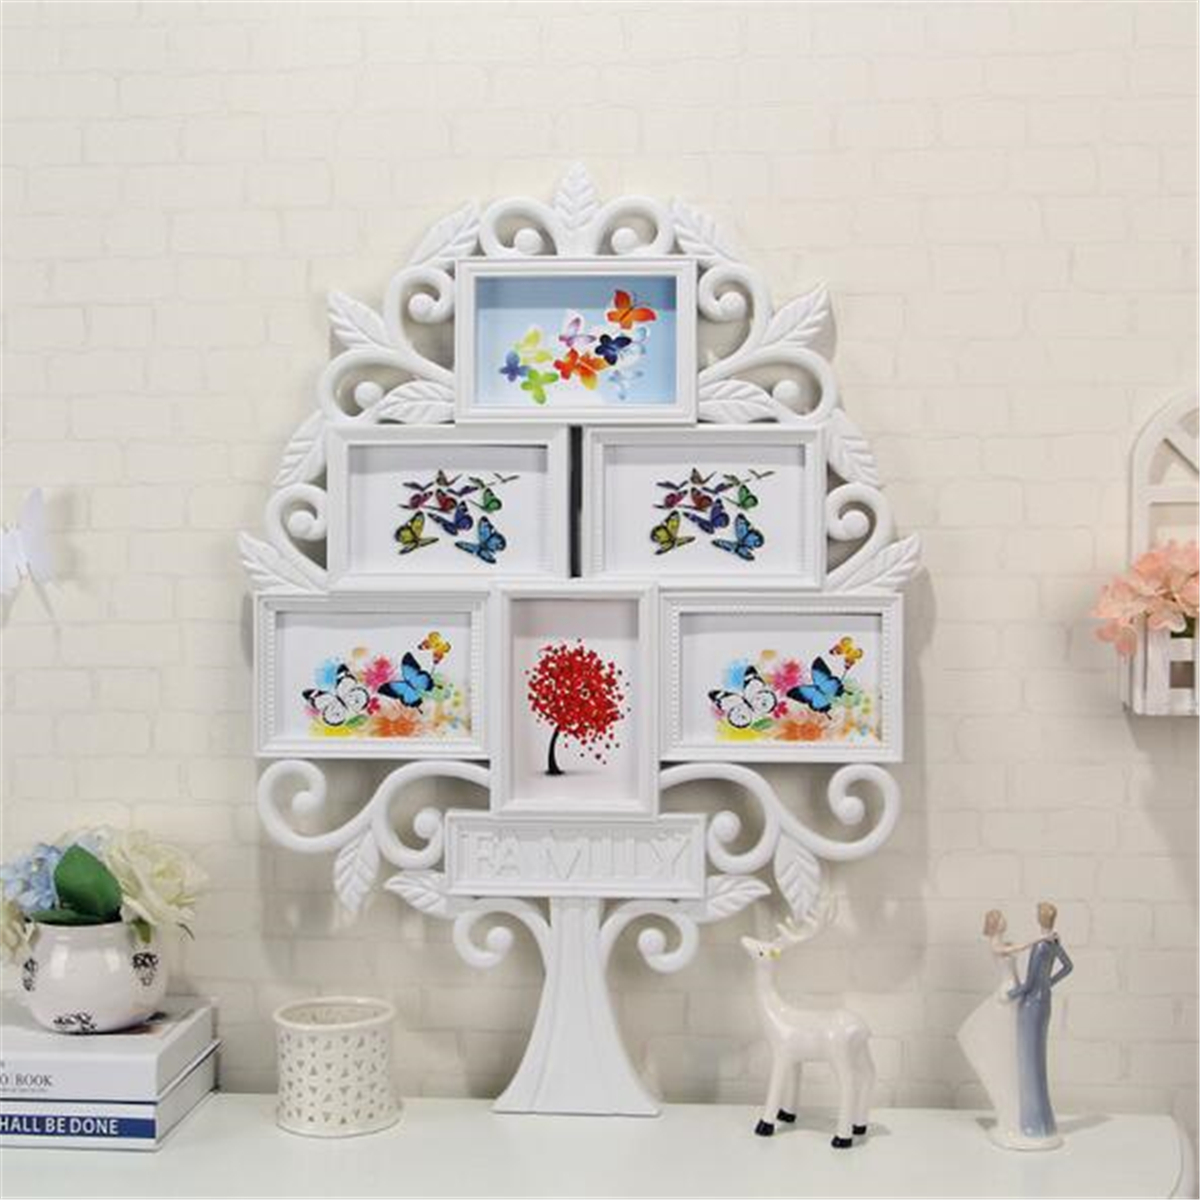 

67*47cm White Family Tree Shaped Photo Frame Wall Mount Collage 6 Pictures Decor